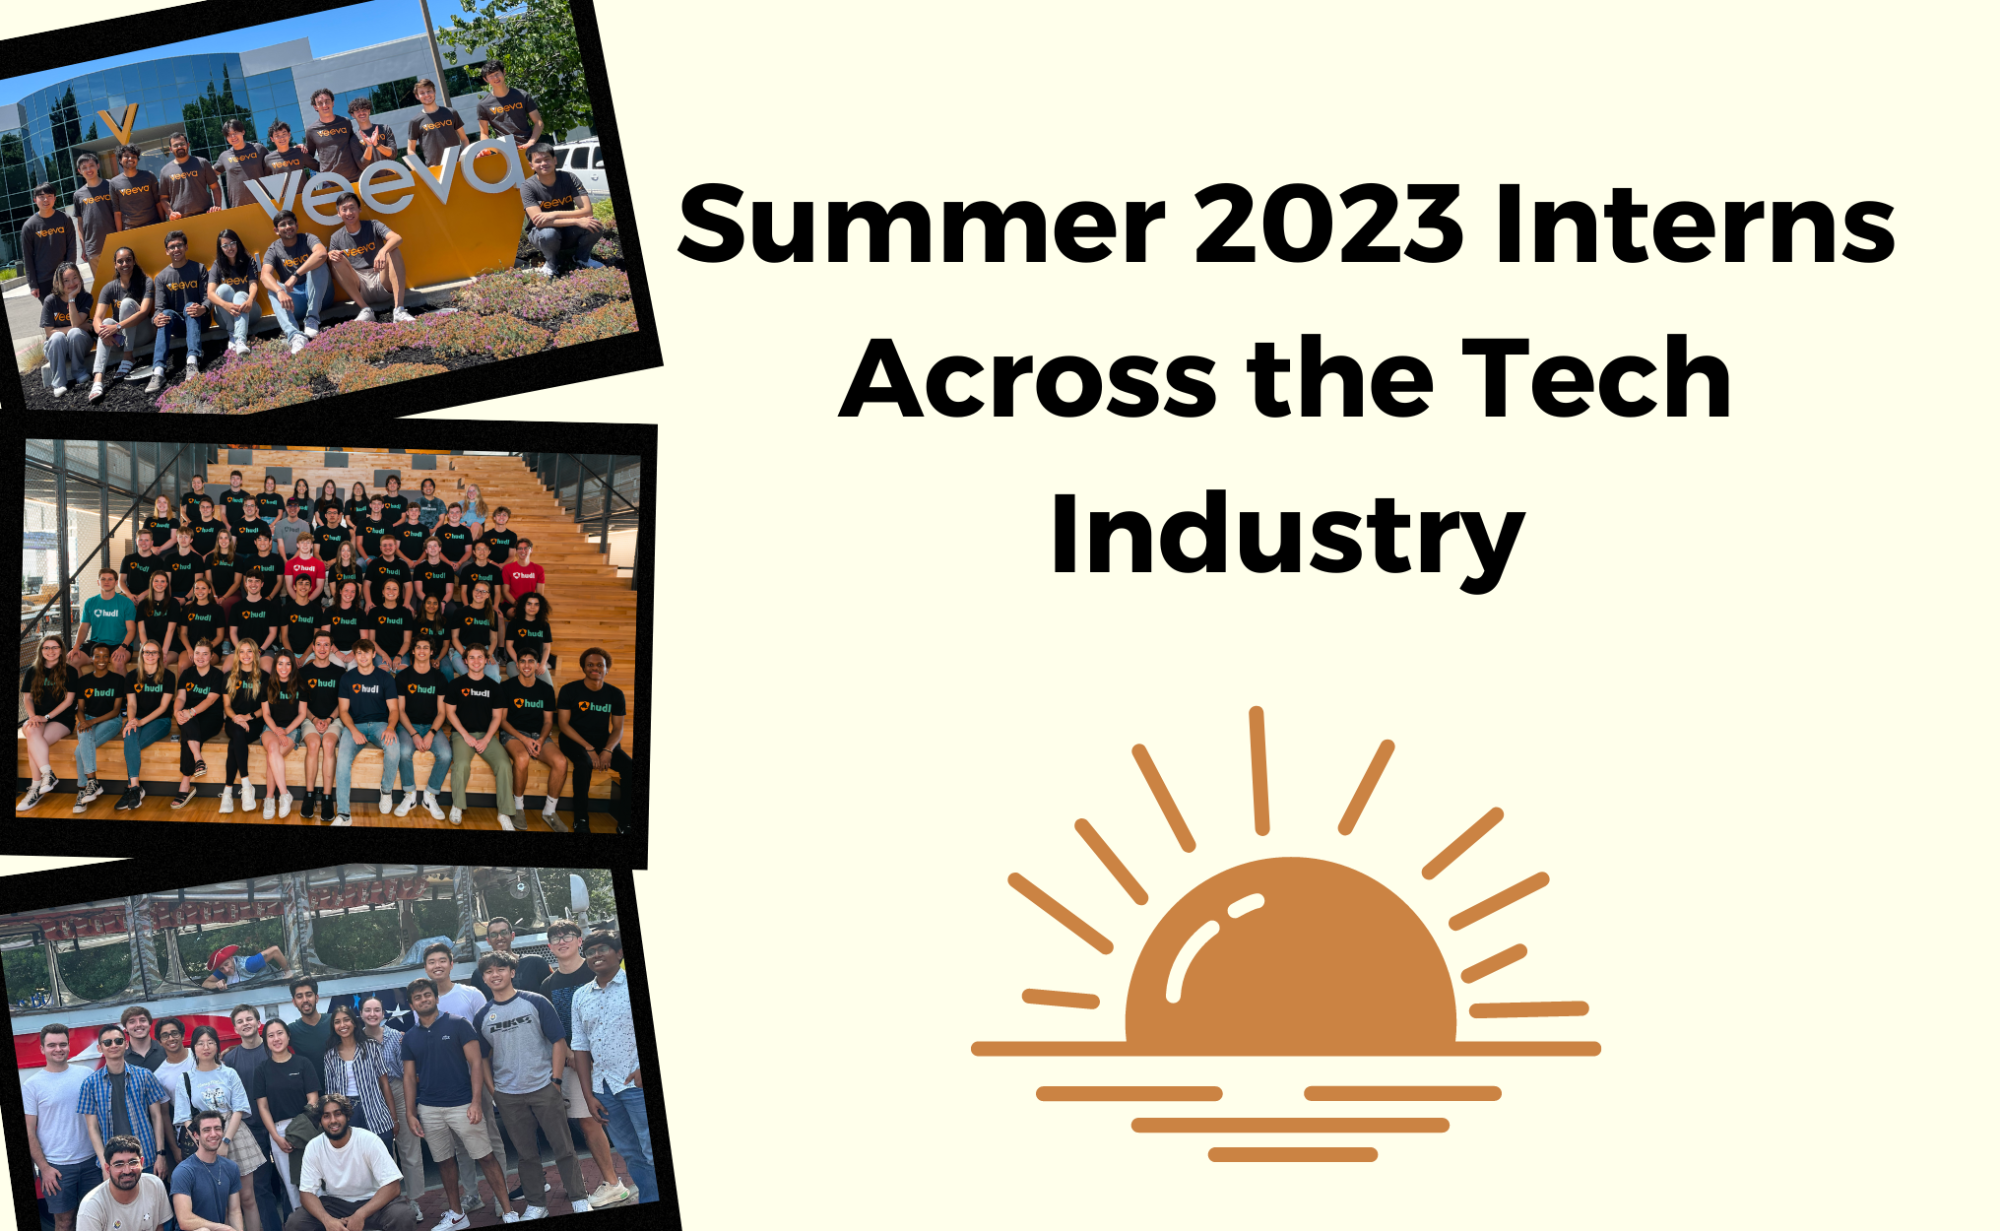 Summer 2023 Interns Across the Tech Industry banner image